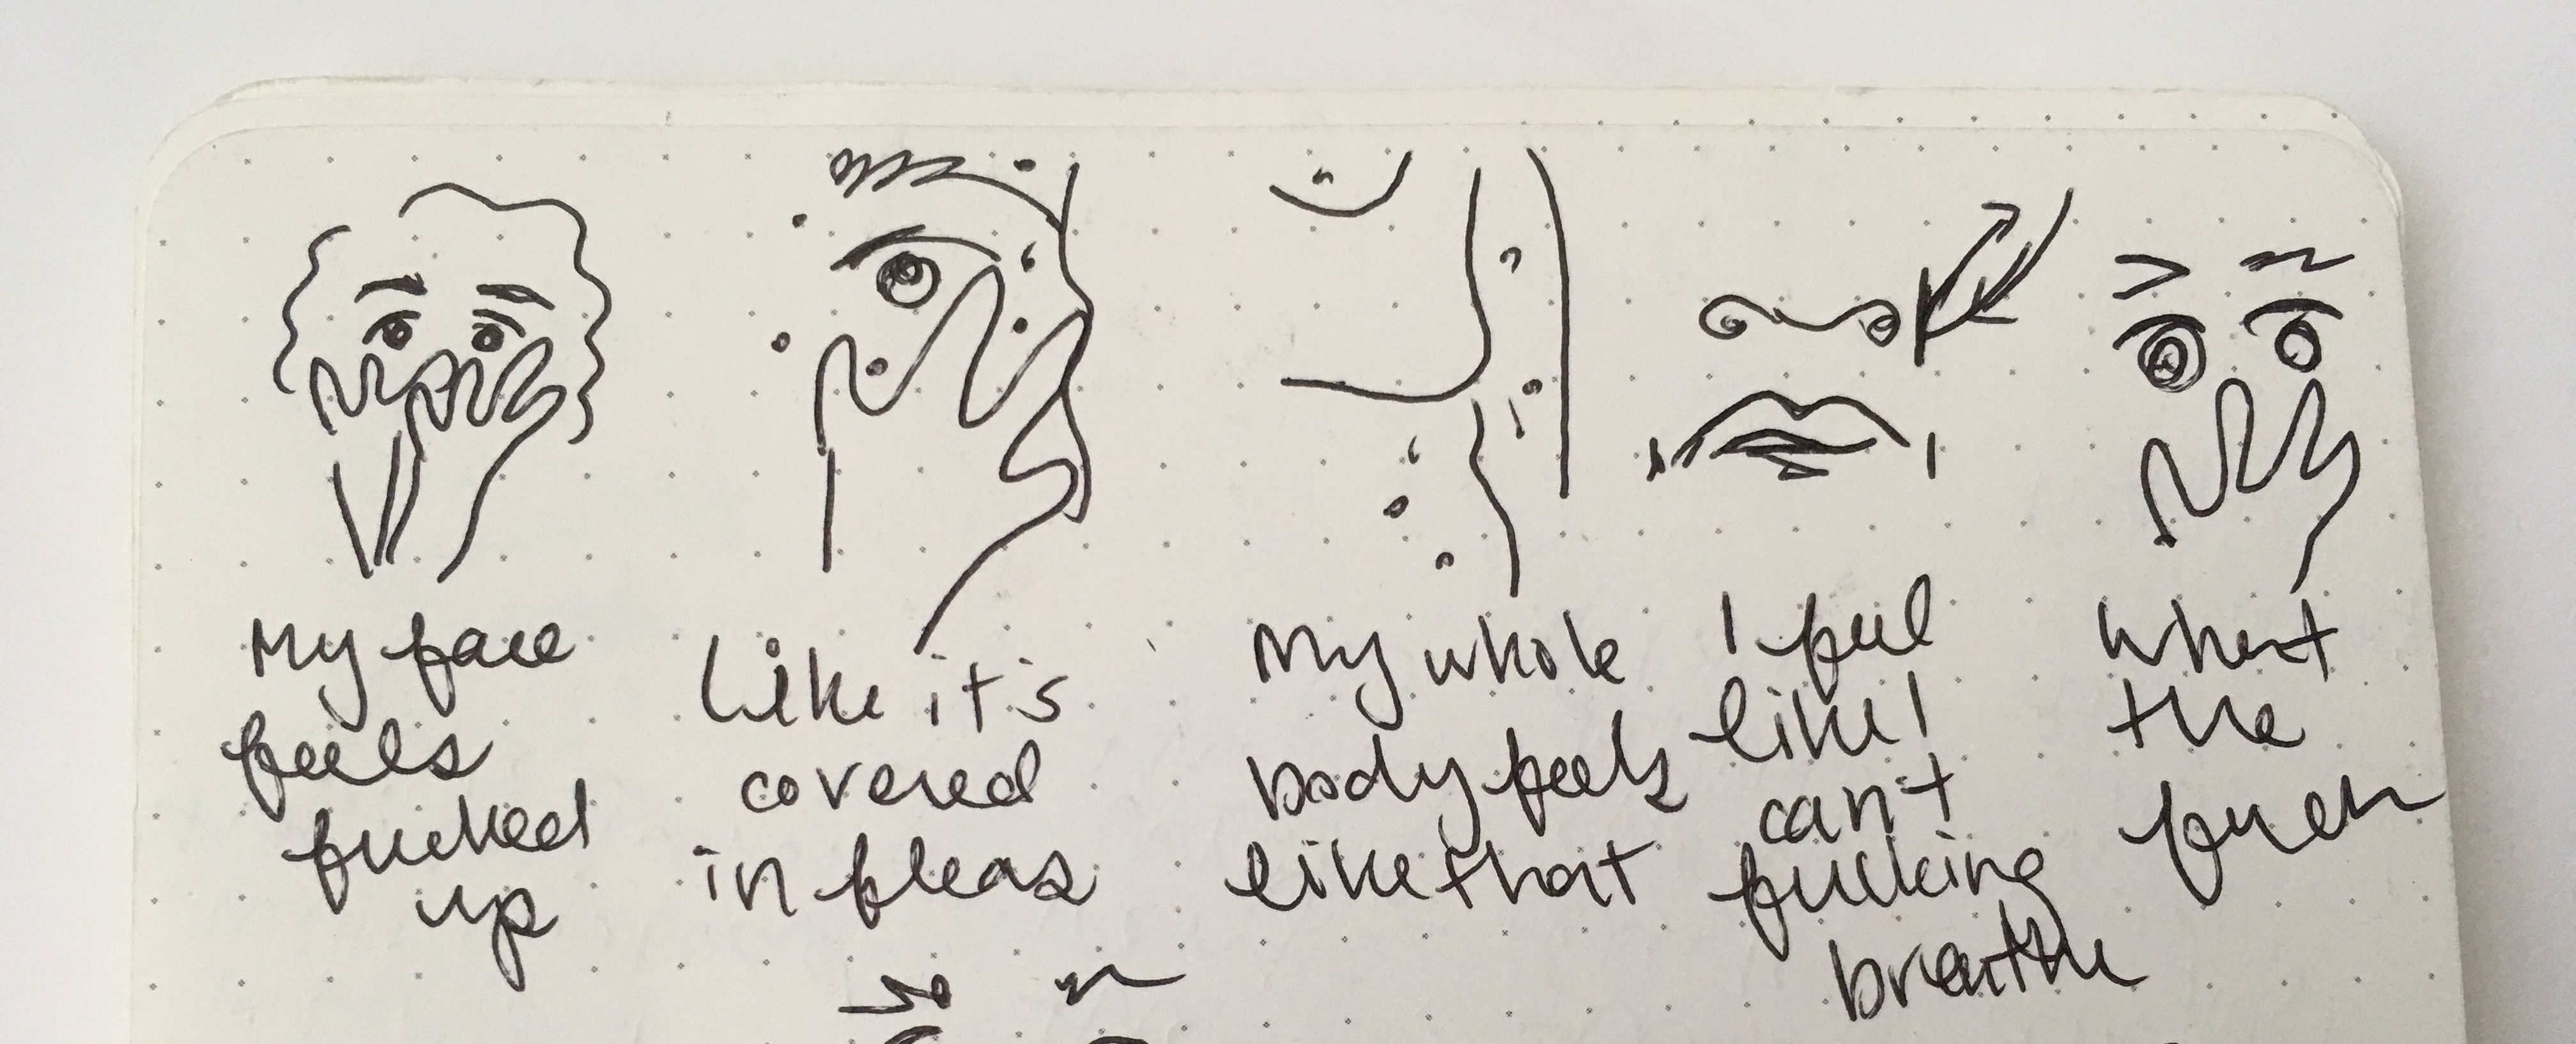 five drawings in a line. the first is a drawing of someone covering their face, followed by a close-up of the same thing, showing dots on their skin. the next drawing is the side of somebody's arm, chest, and stomach, more dots visible on their skin. the next is somebody's mouth and nose, with blocked off arrows going into and out of their nose. the last is somebody covering their face again, eyes large.